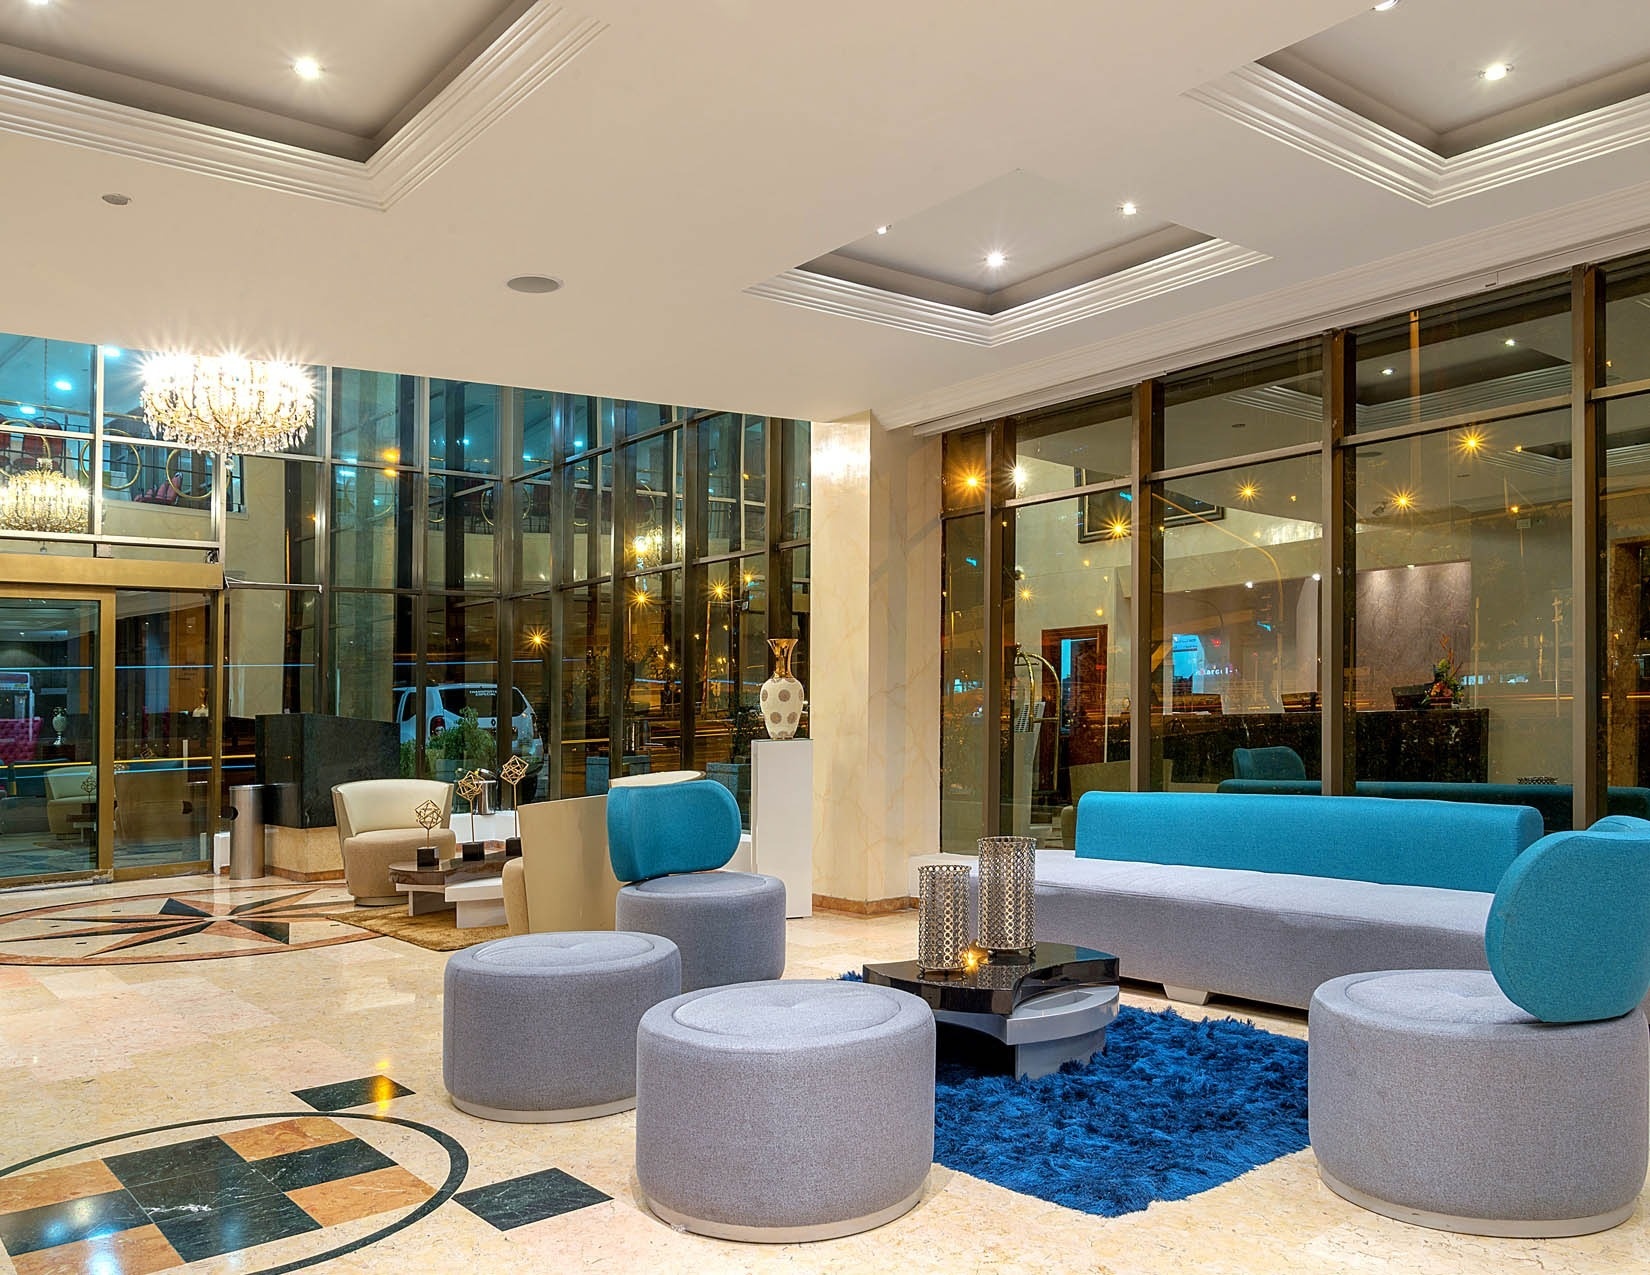 Lobby del hotel EM andes plaza